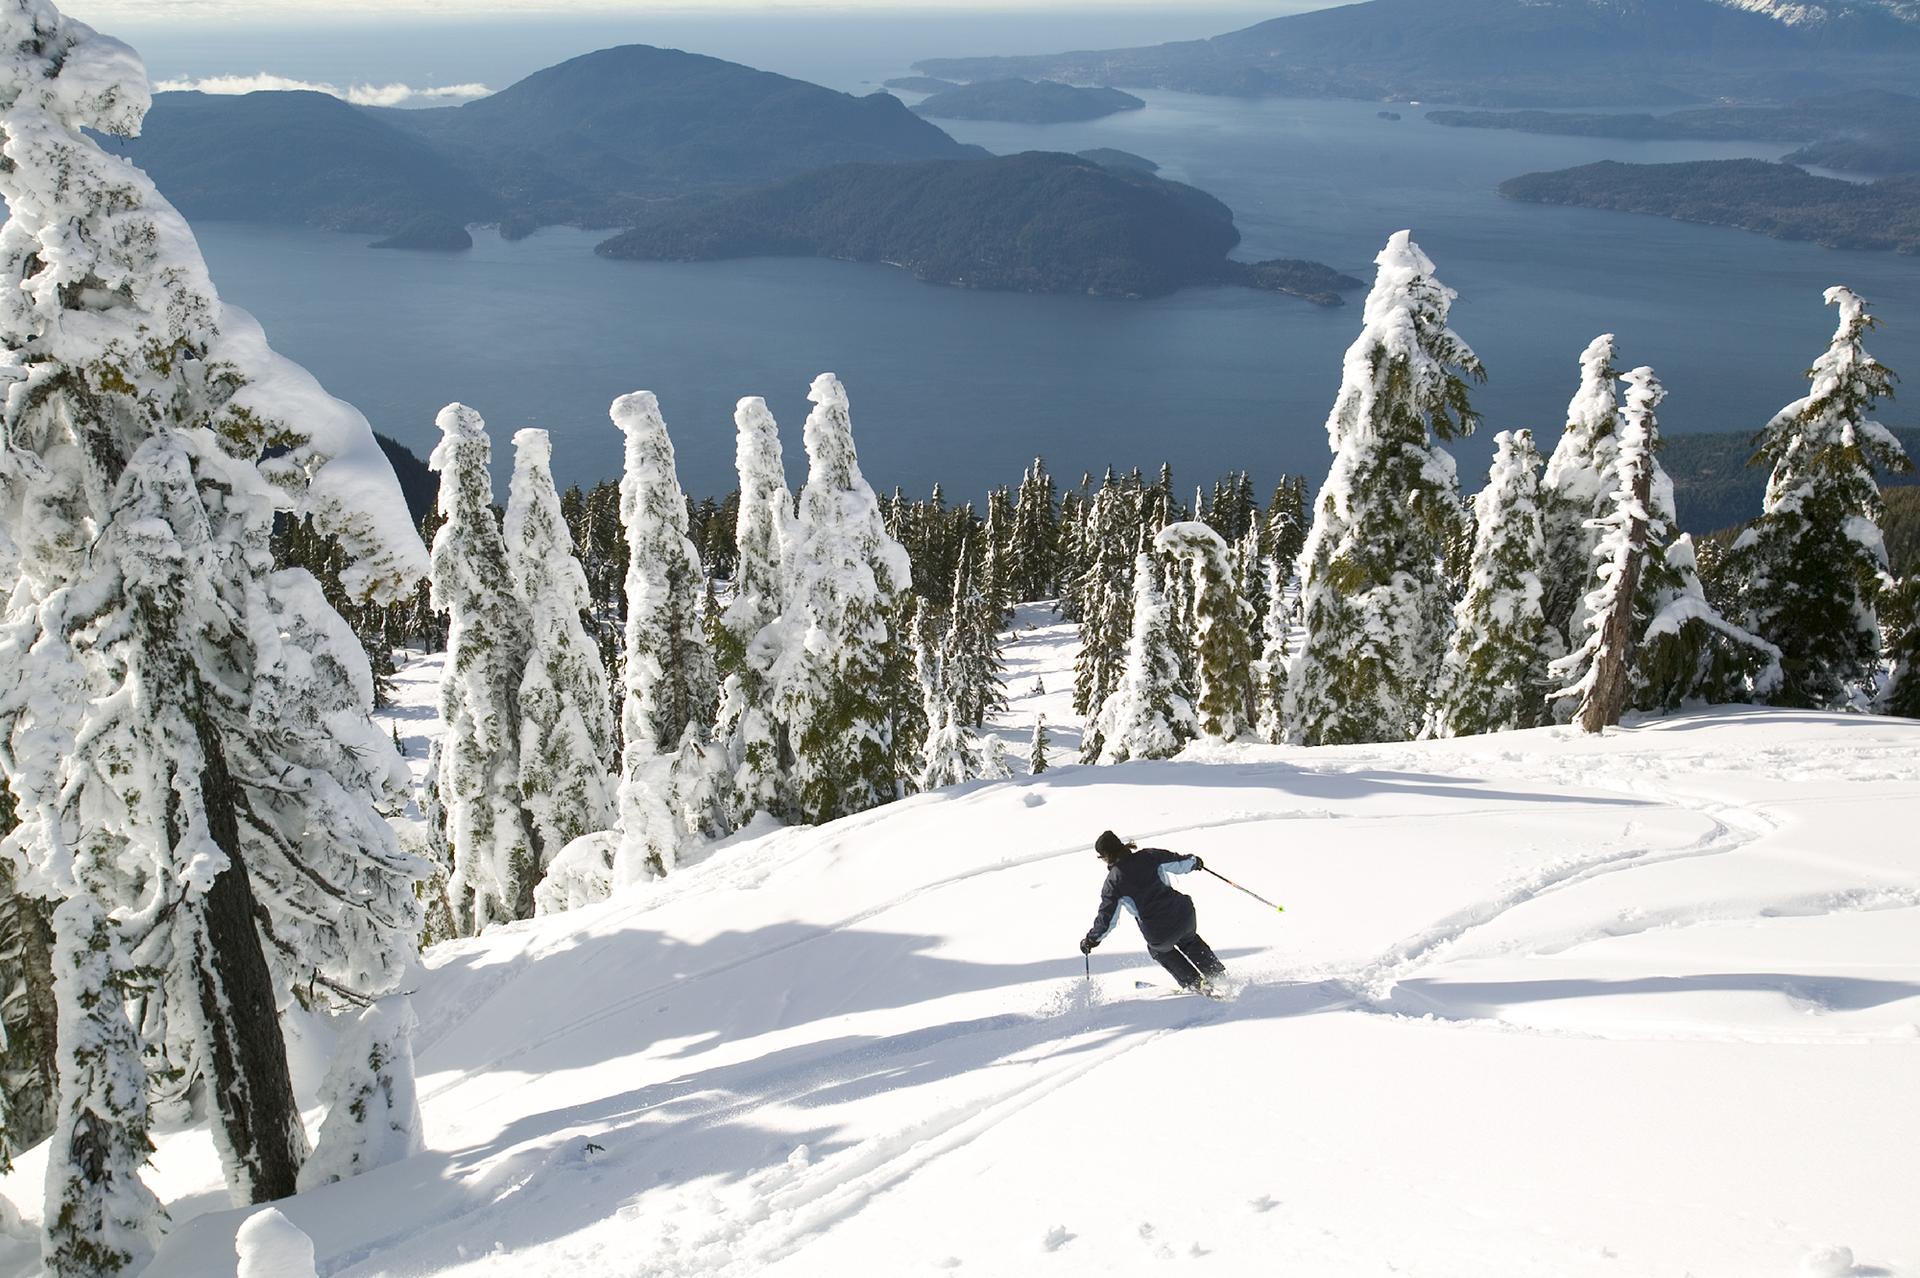 A skier descends a powdery white mountain lined with snow-topped trees